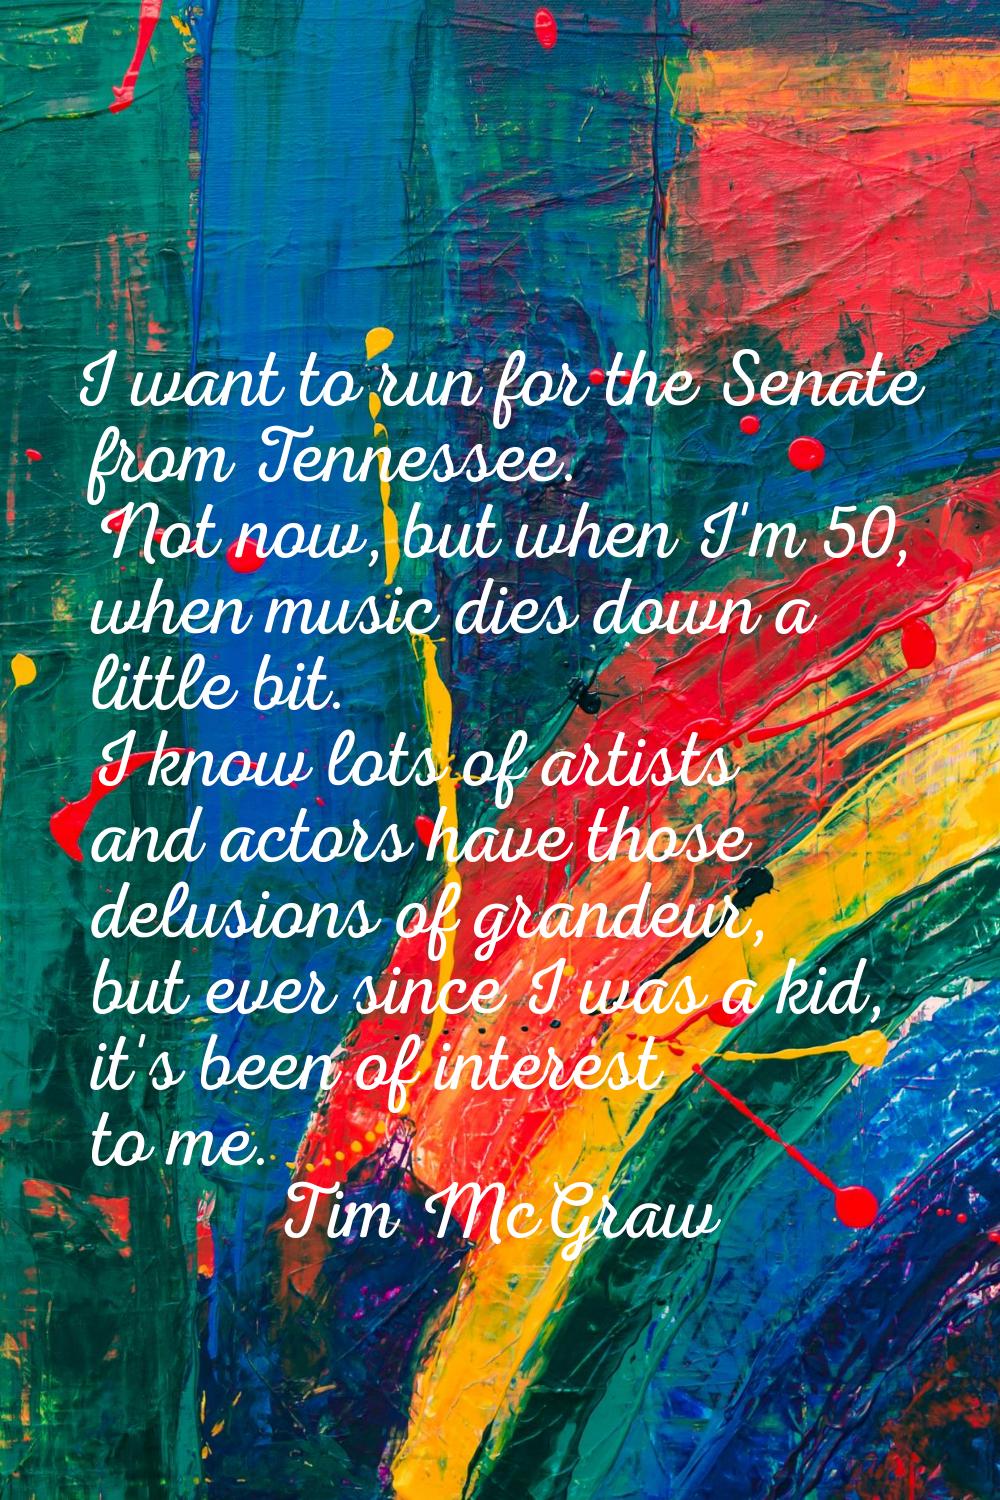 I want to run for the Senate from Tennessee. Not now, but when I'm 50, when music dies down a littl